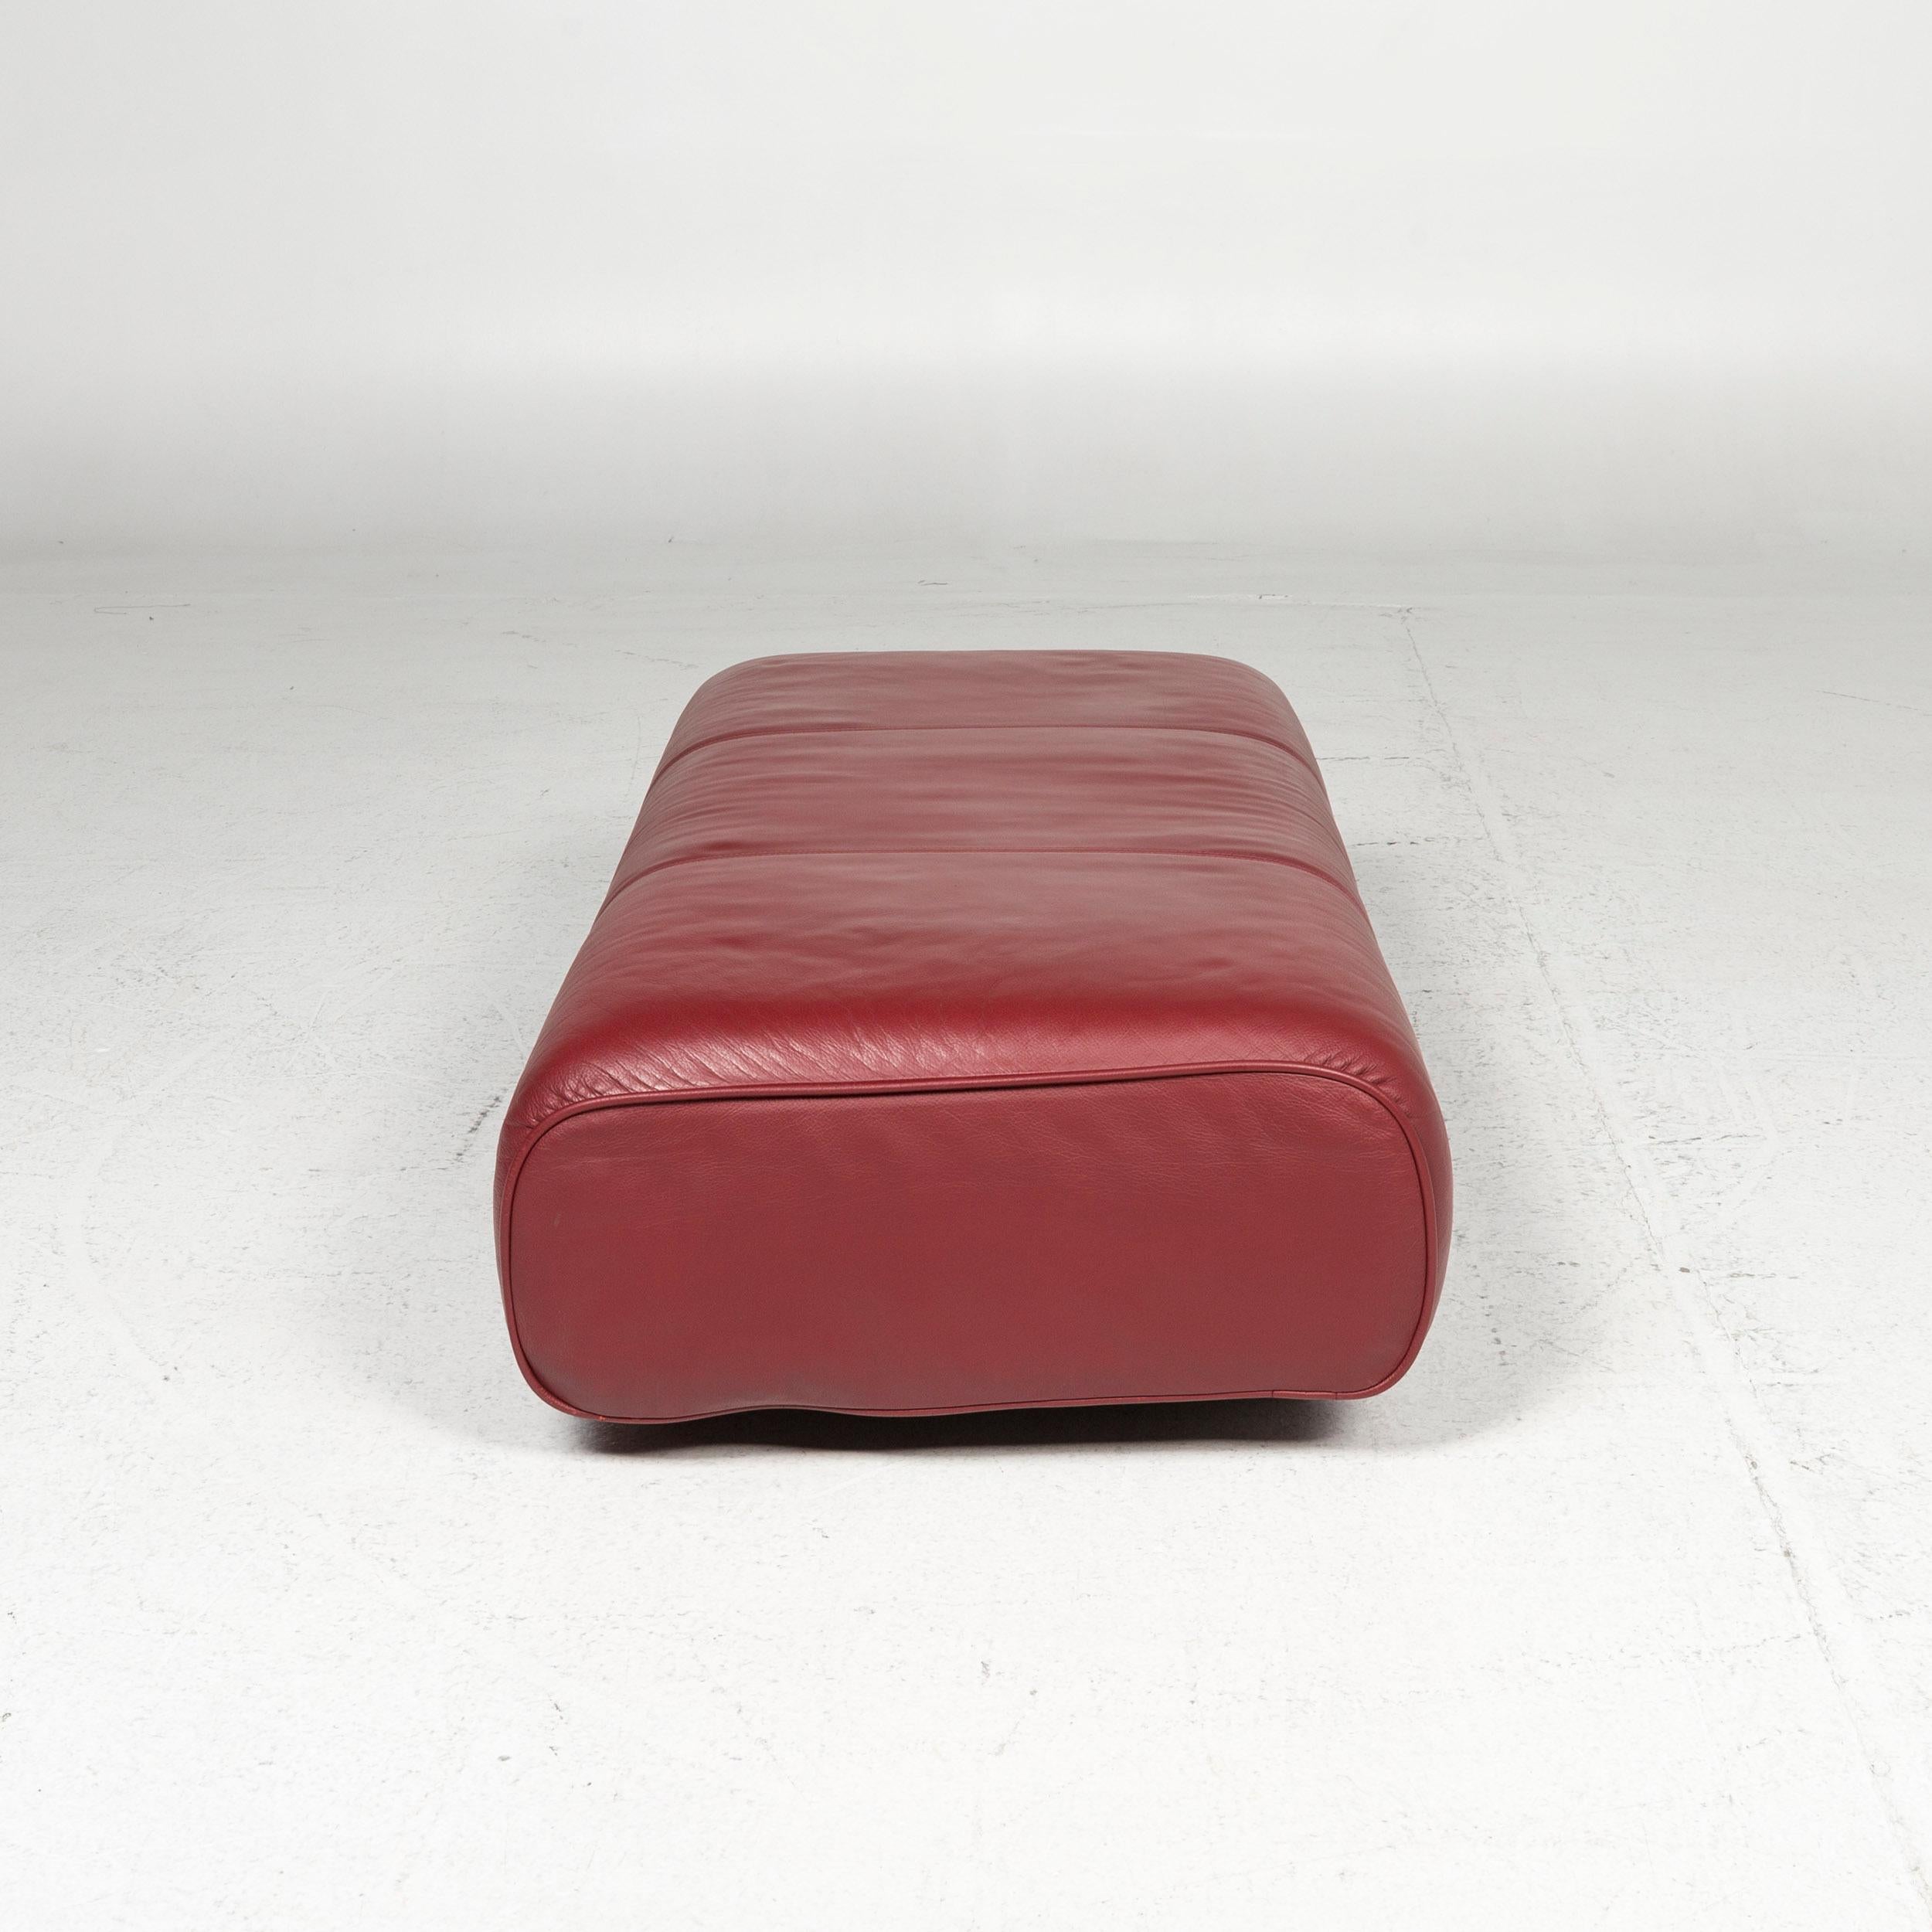 Rolf Benz Leather Ottoman Red In Excellent Condition For Sale In Cologne, DE